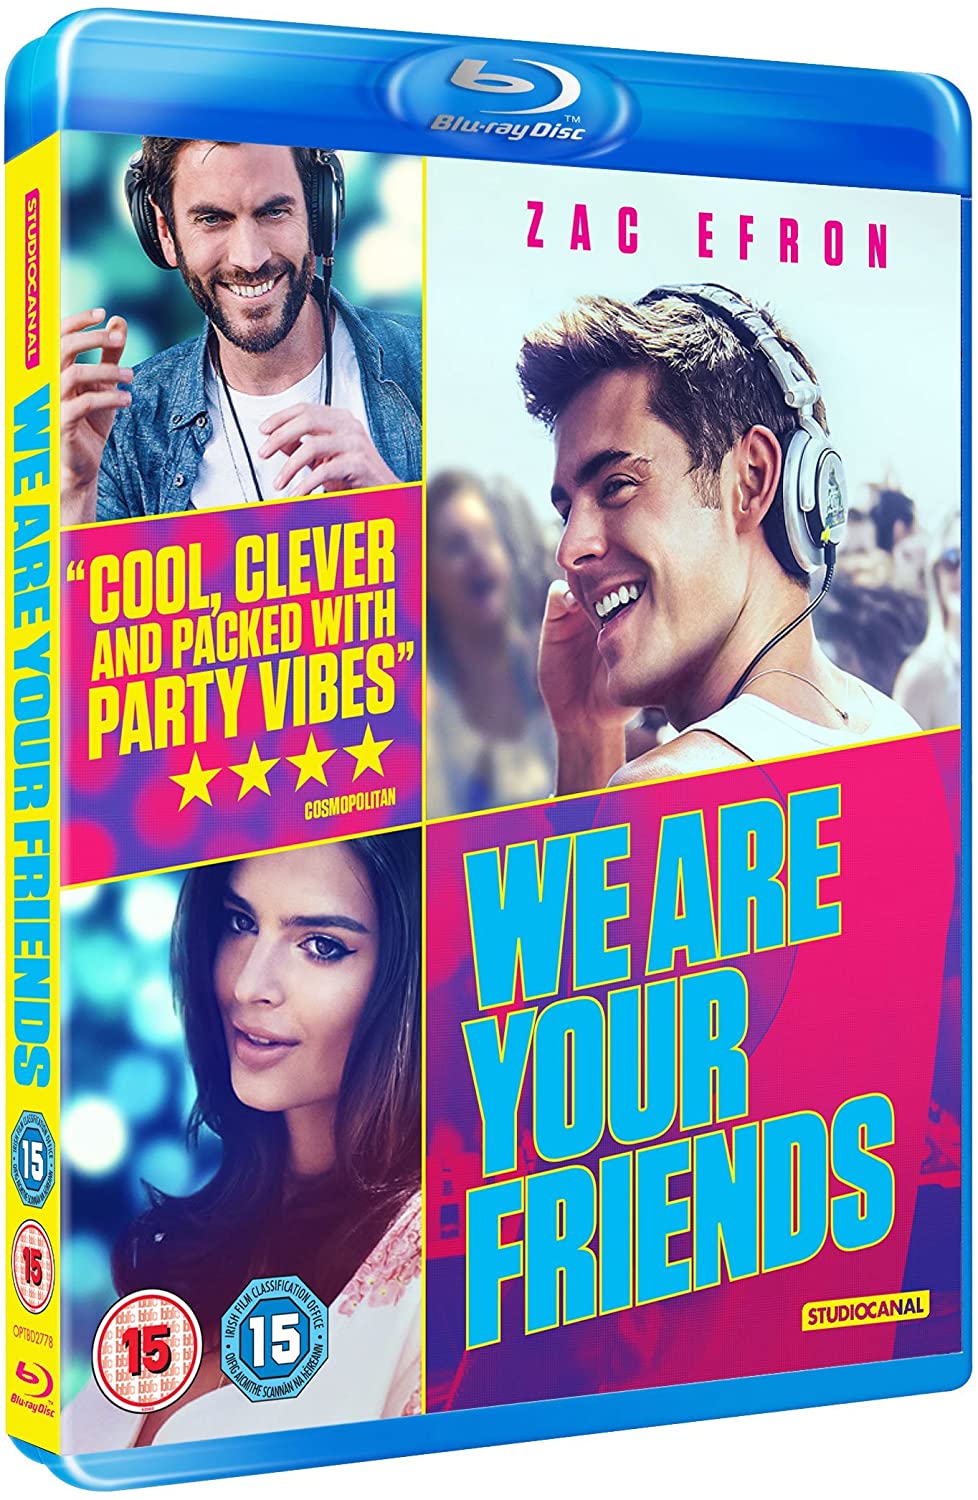 We Are Your Friends [2015] - Romance/Drama [Blu-ray]